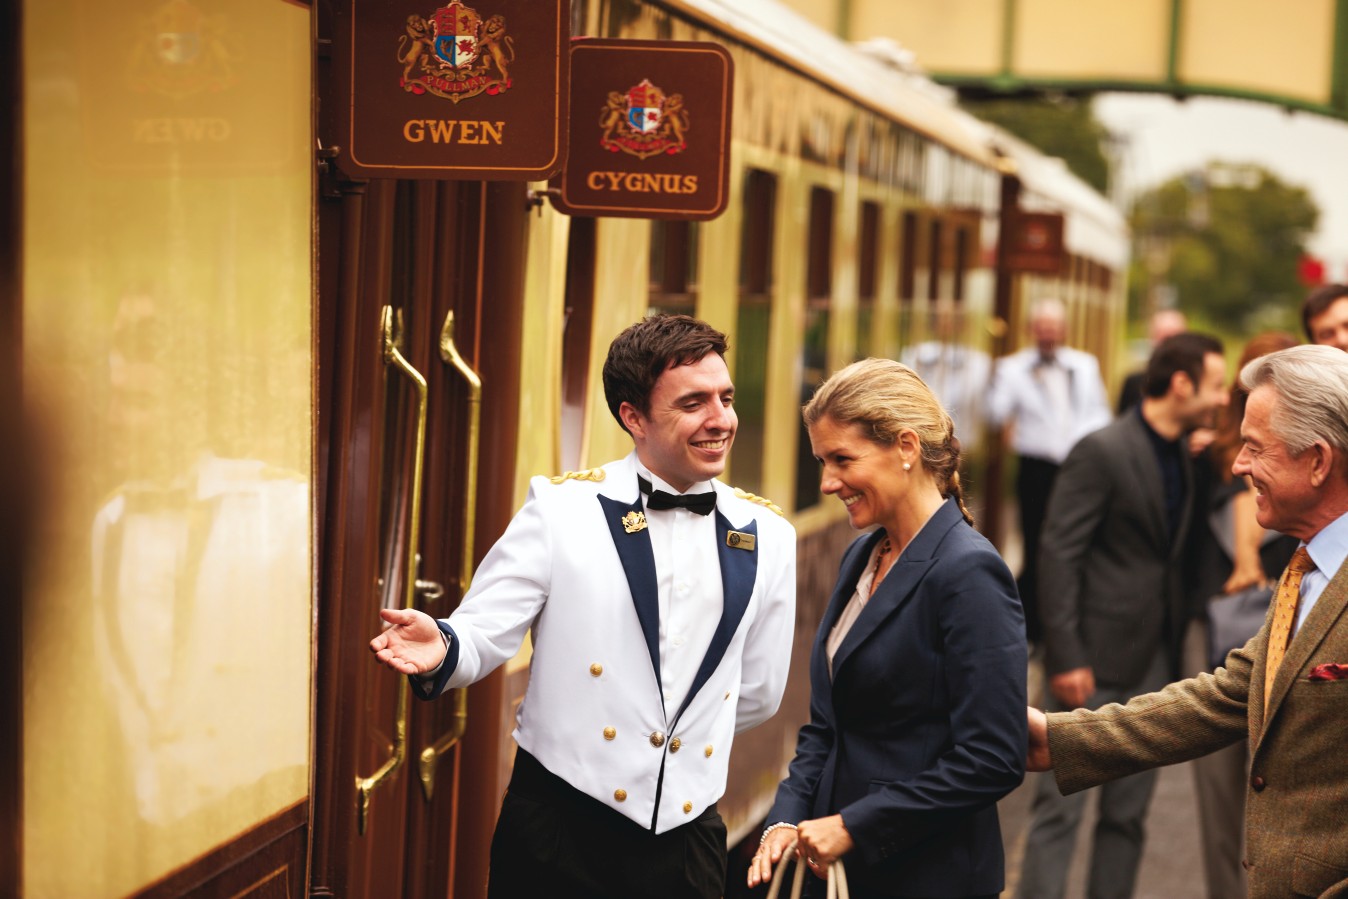 day trips in uk on orient express